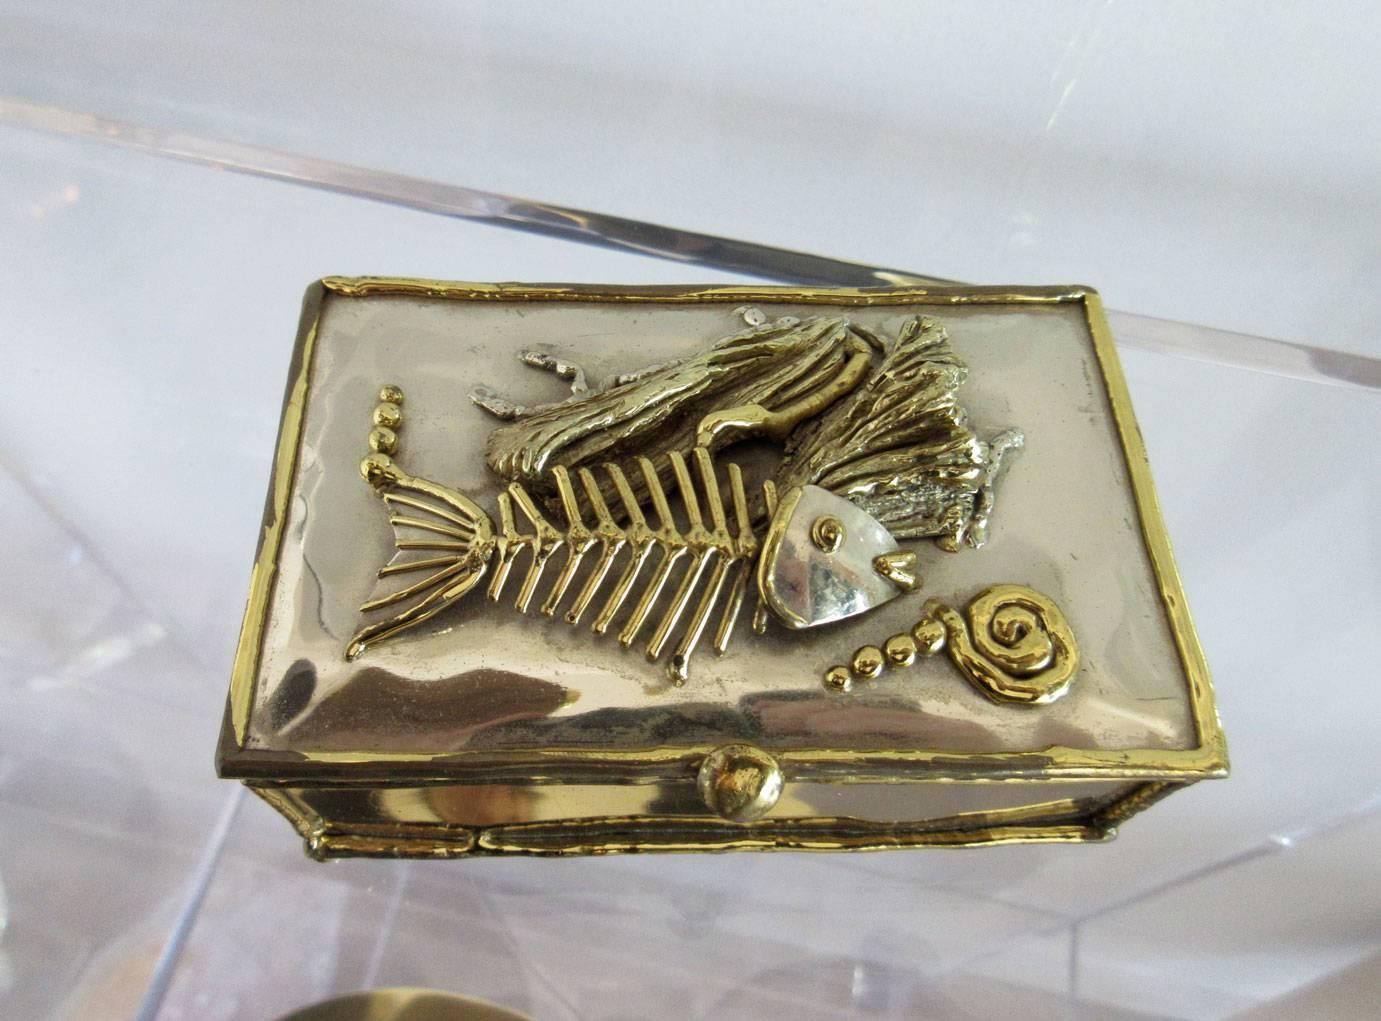 Vintage mixed metal Brutalist box with sculptural fish motif signed "PP.".